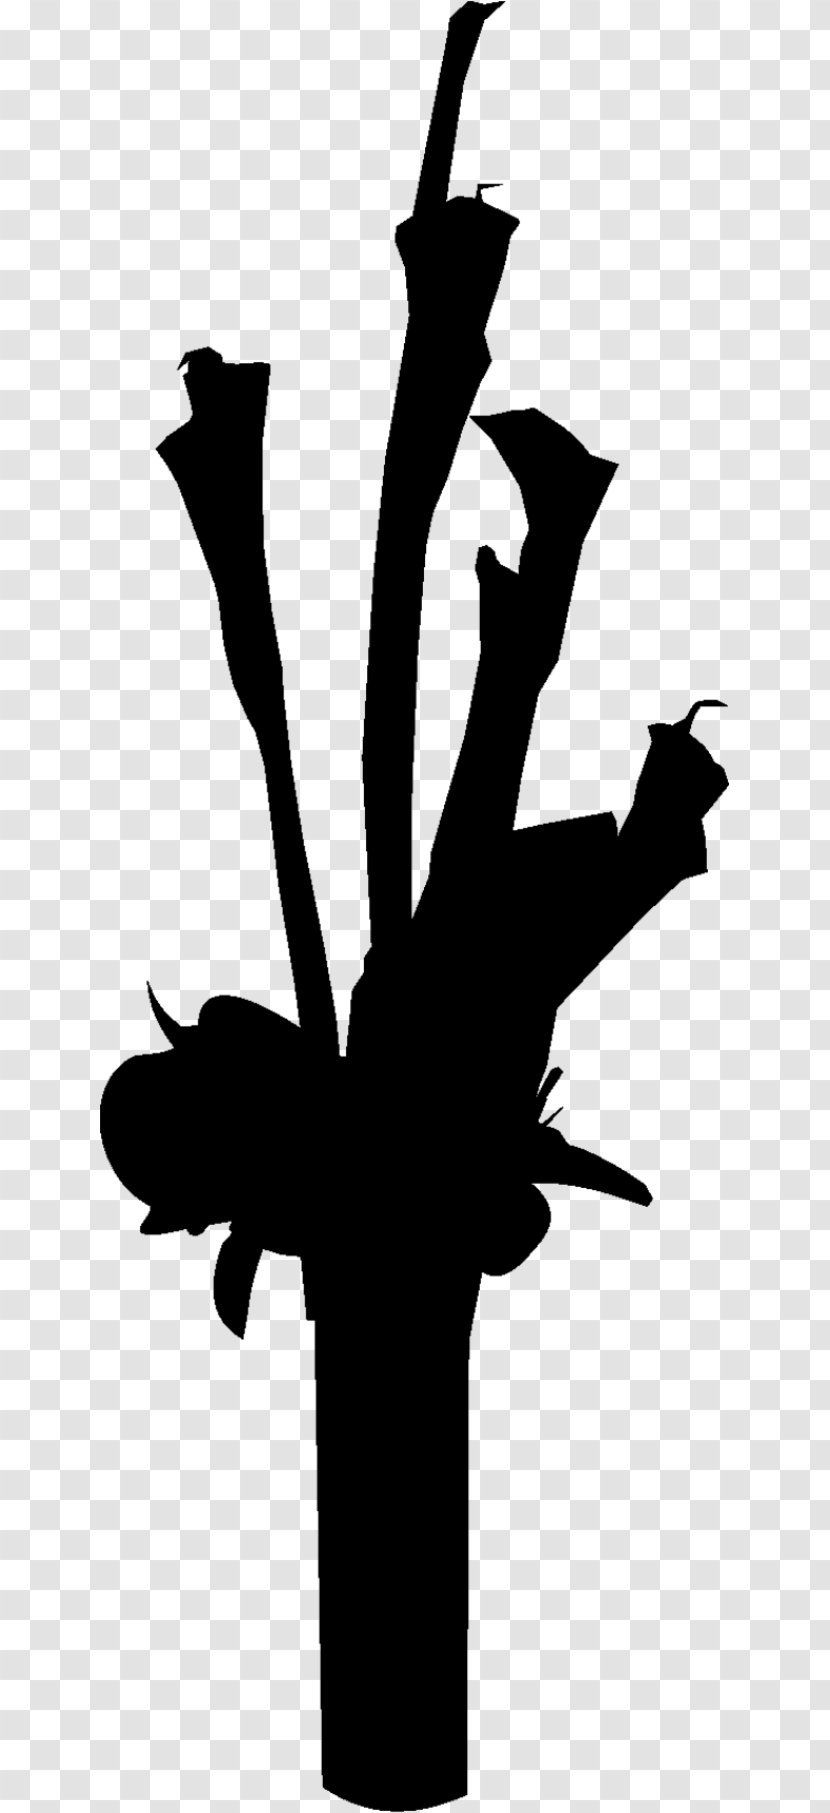 Clip Art Illustration Tree Silhouette Character - Blackandwhite - Fictional Transparent PNG